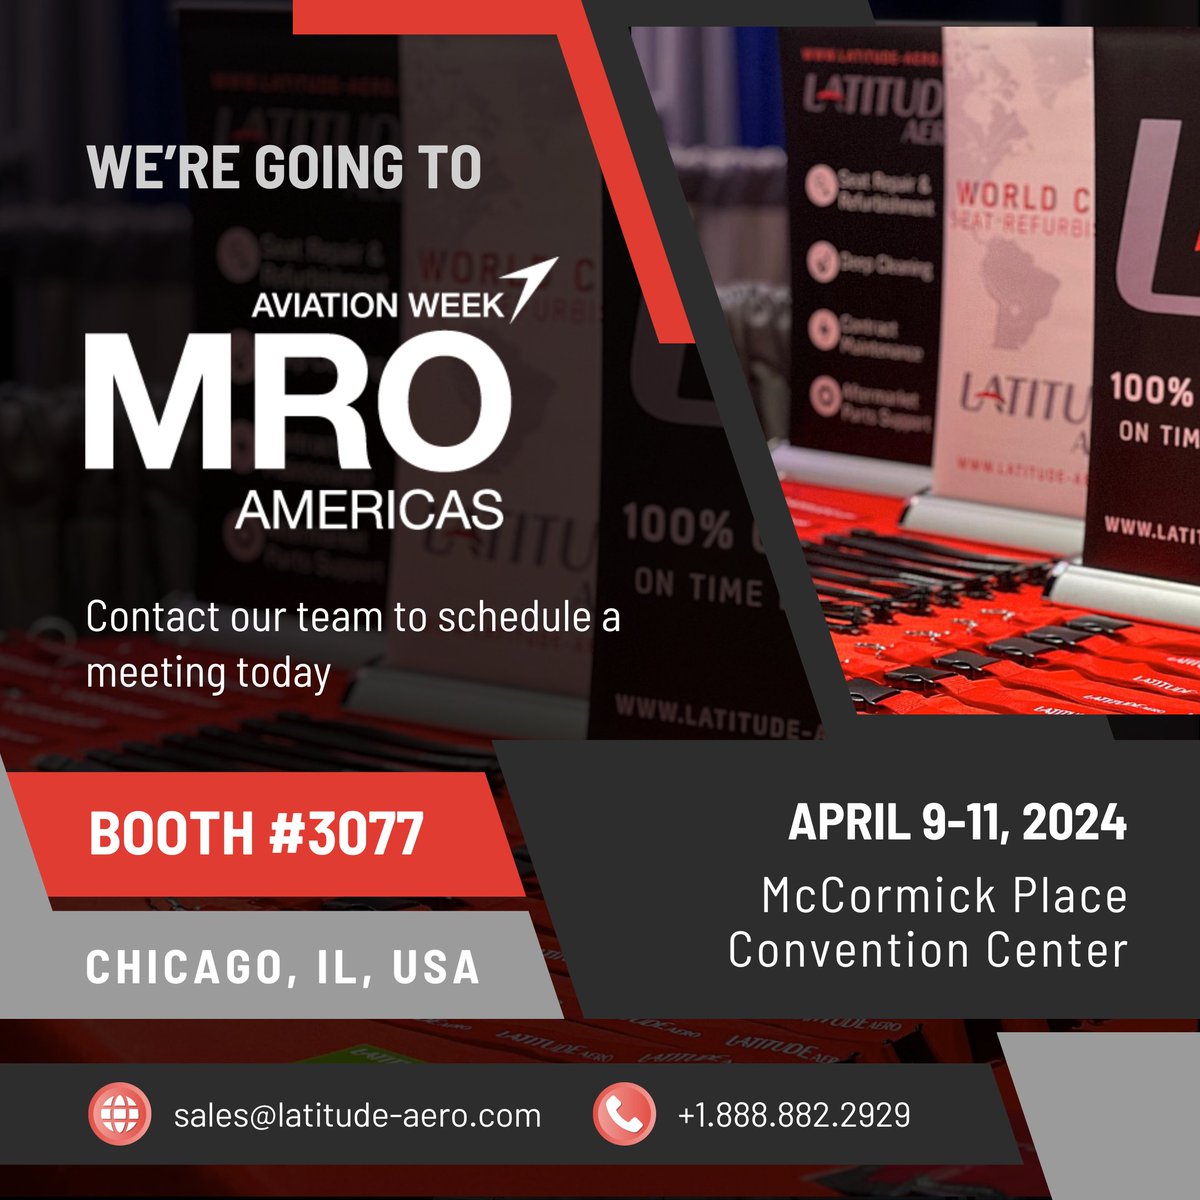 Latitude Aero is gearing up for MRO Americas on April 9-11! Don't miss out on this prime opportunity to connect with us. Reach out to our dedicated sales team now to schedule a meeting. See you in Chicago! 🏙️ #MROAmericas #LatitudeAero #InnovativeSolutions #PaxEx #AvGeek #MRO…